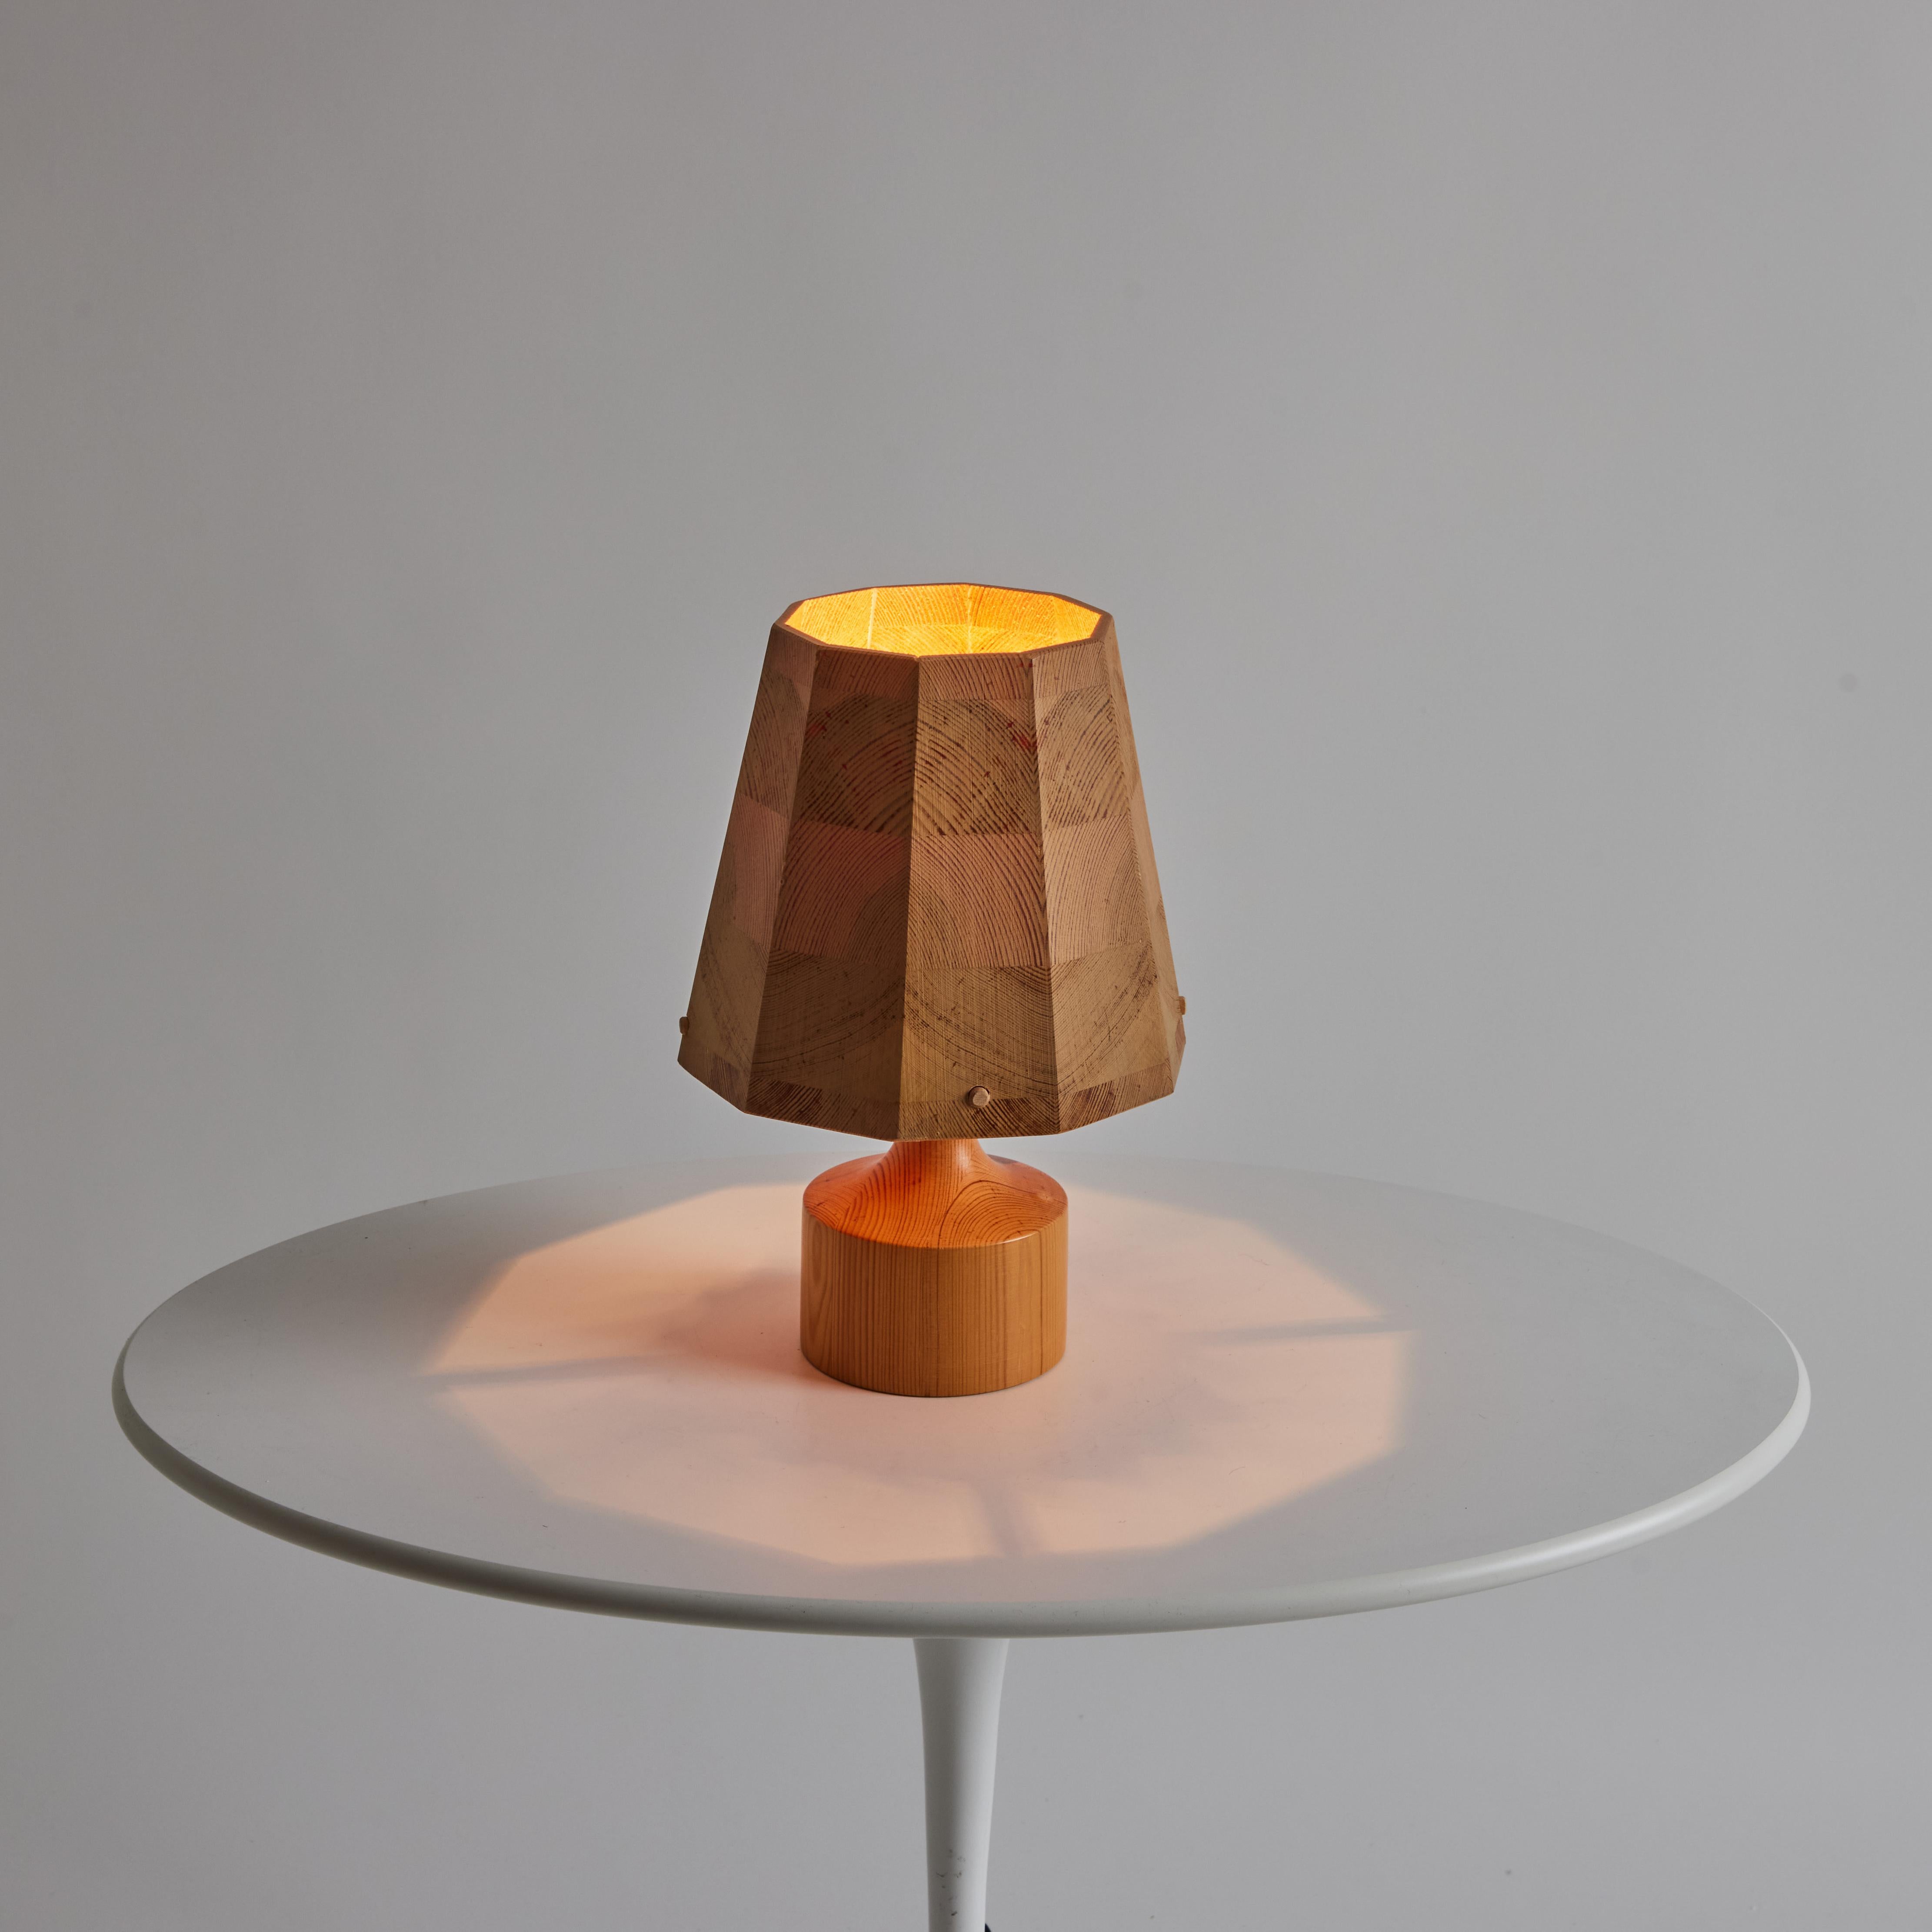 Pair of 1960s Wood Table Lamps Attributed to Hans-Agne Jakobsson for AB Ellysett For Sale 2